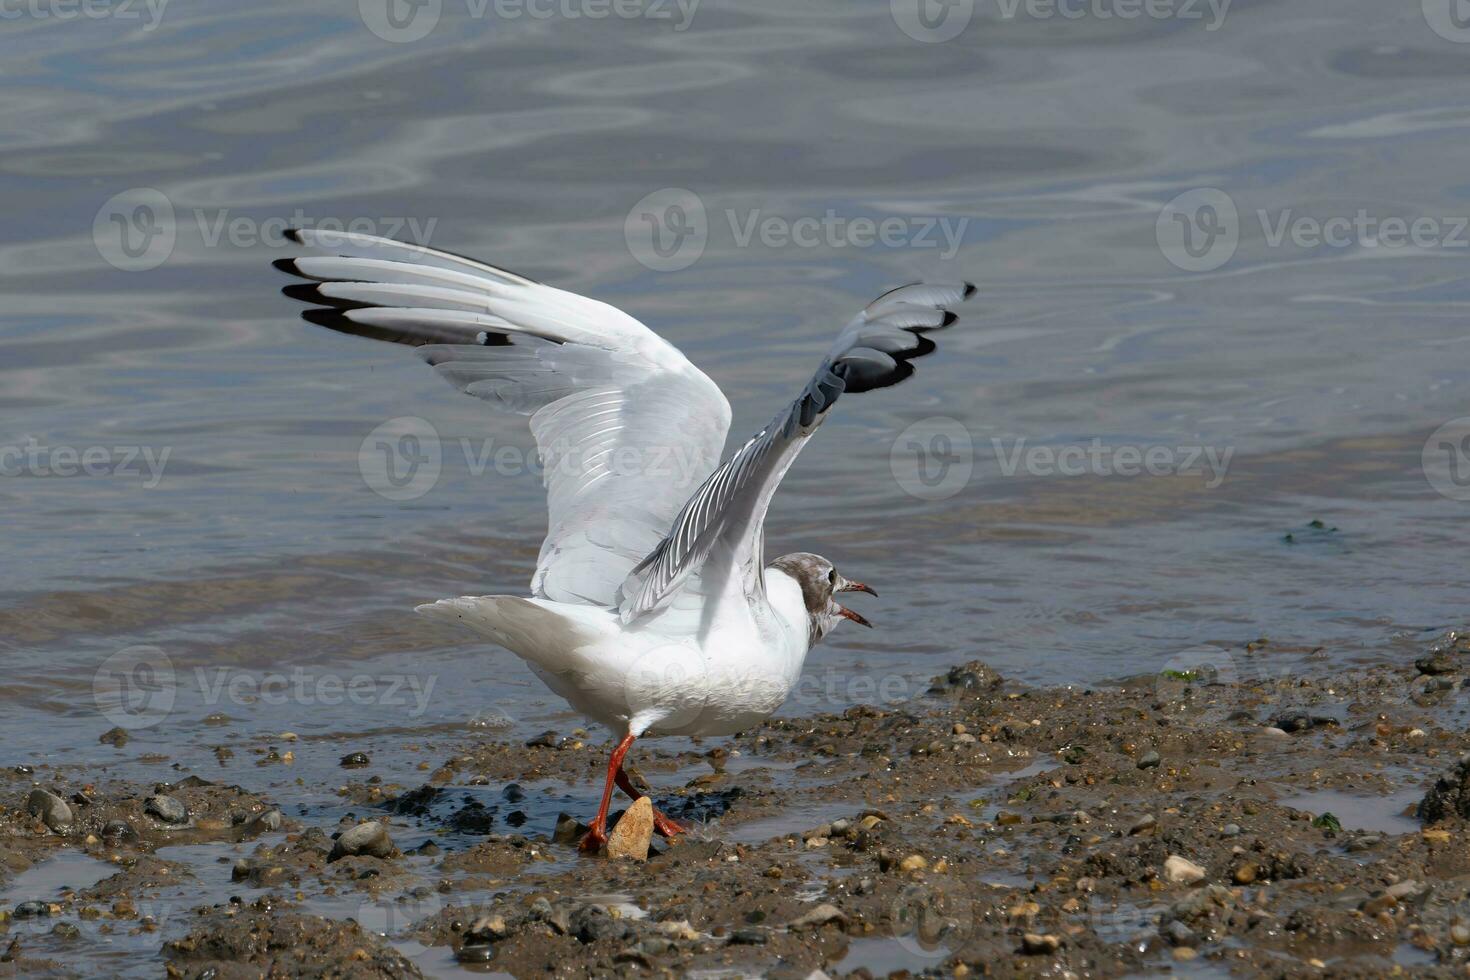 Black headed Gull with wings raised photo